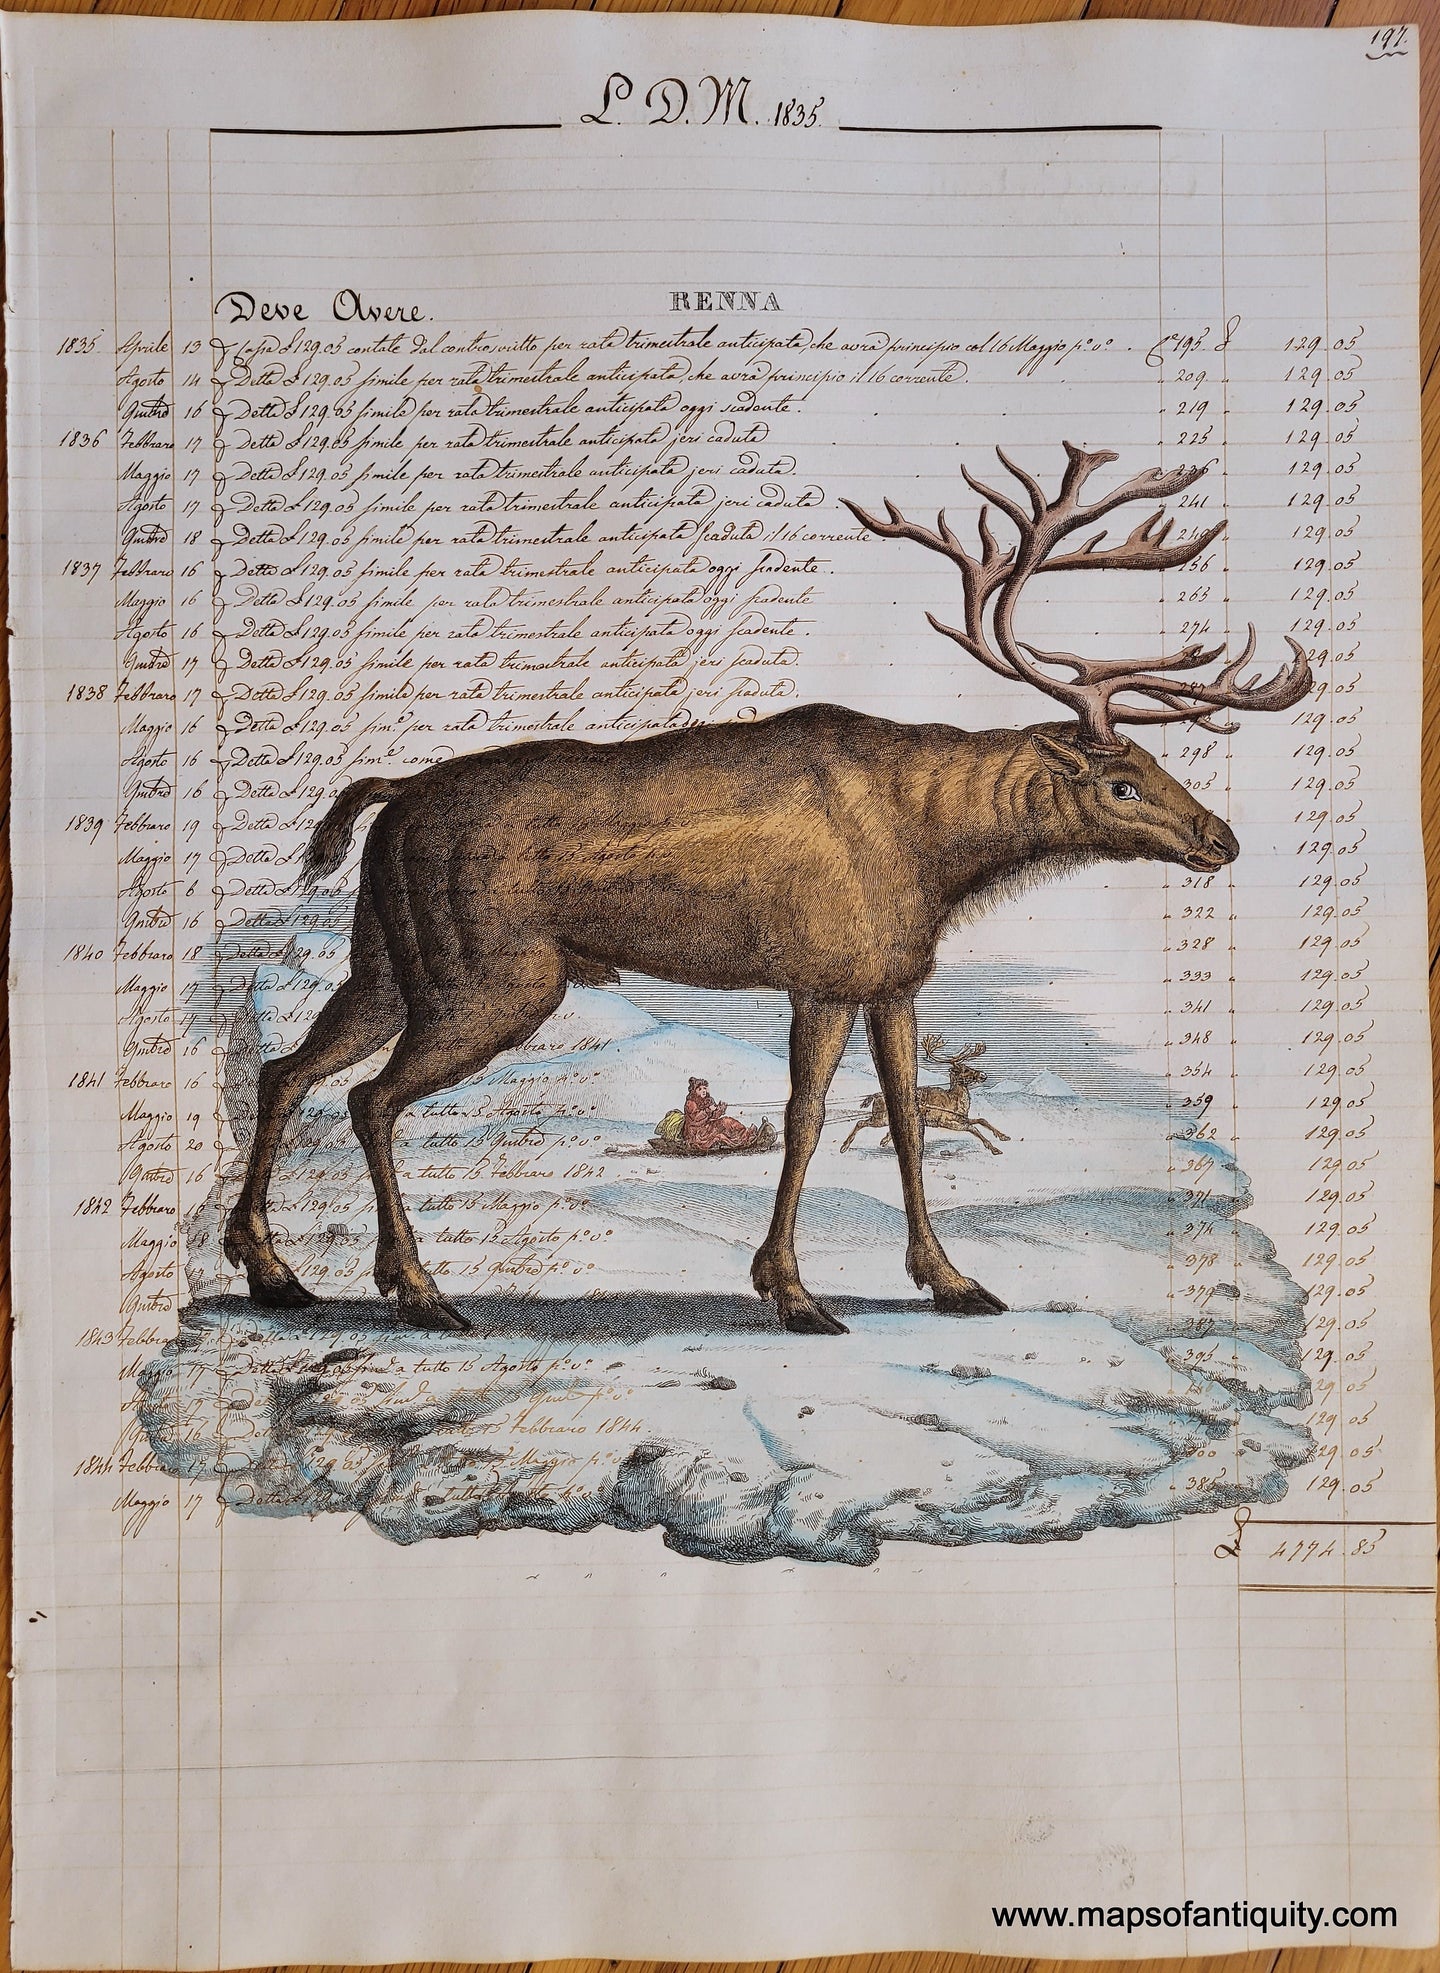 Specialty-Hand-Made-Reproduction-on-Antique-Paper-Renna-Reindeer---Reproduction-Maps-Of-Antiquity